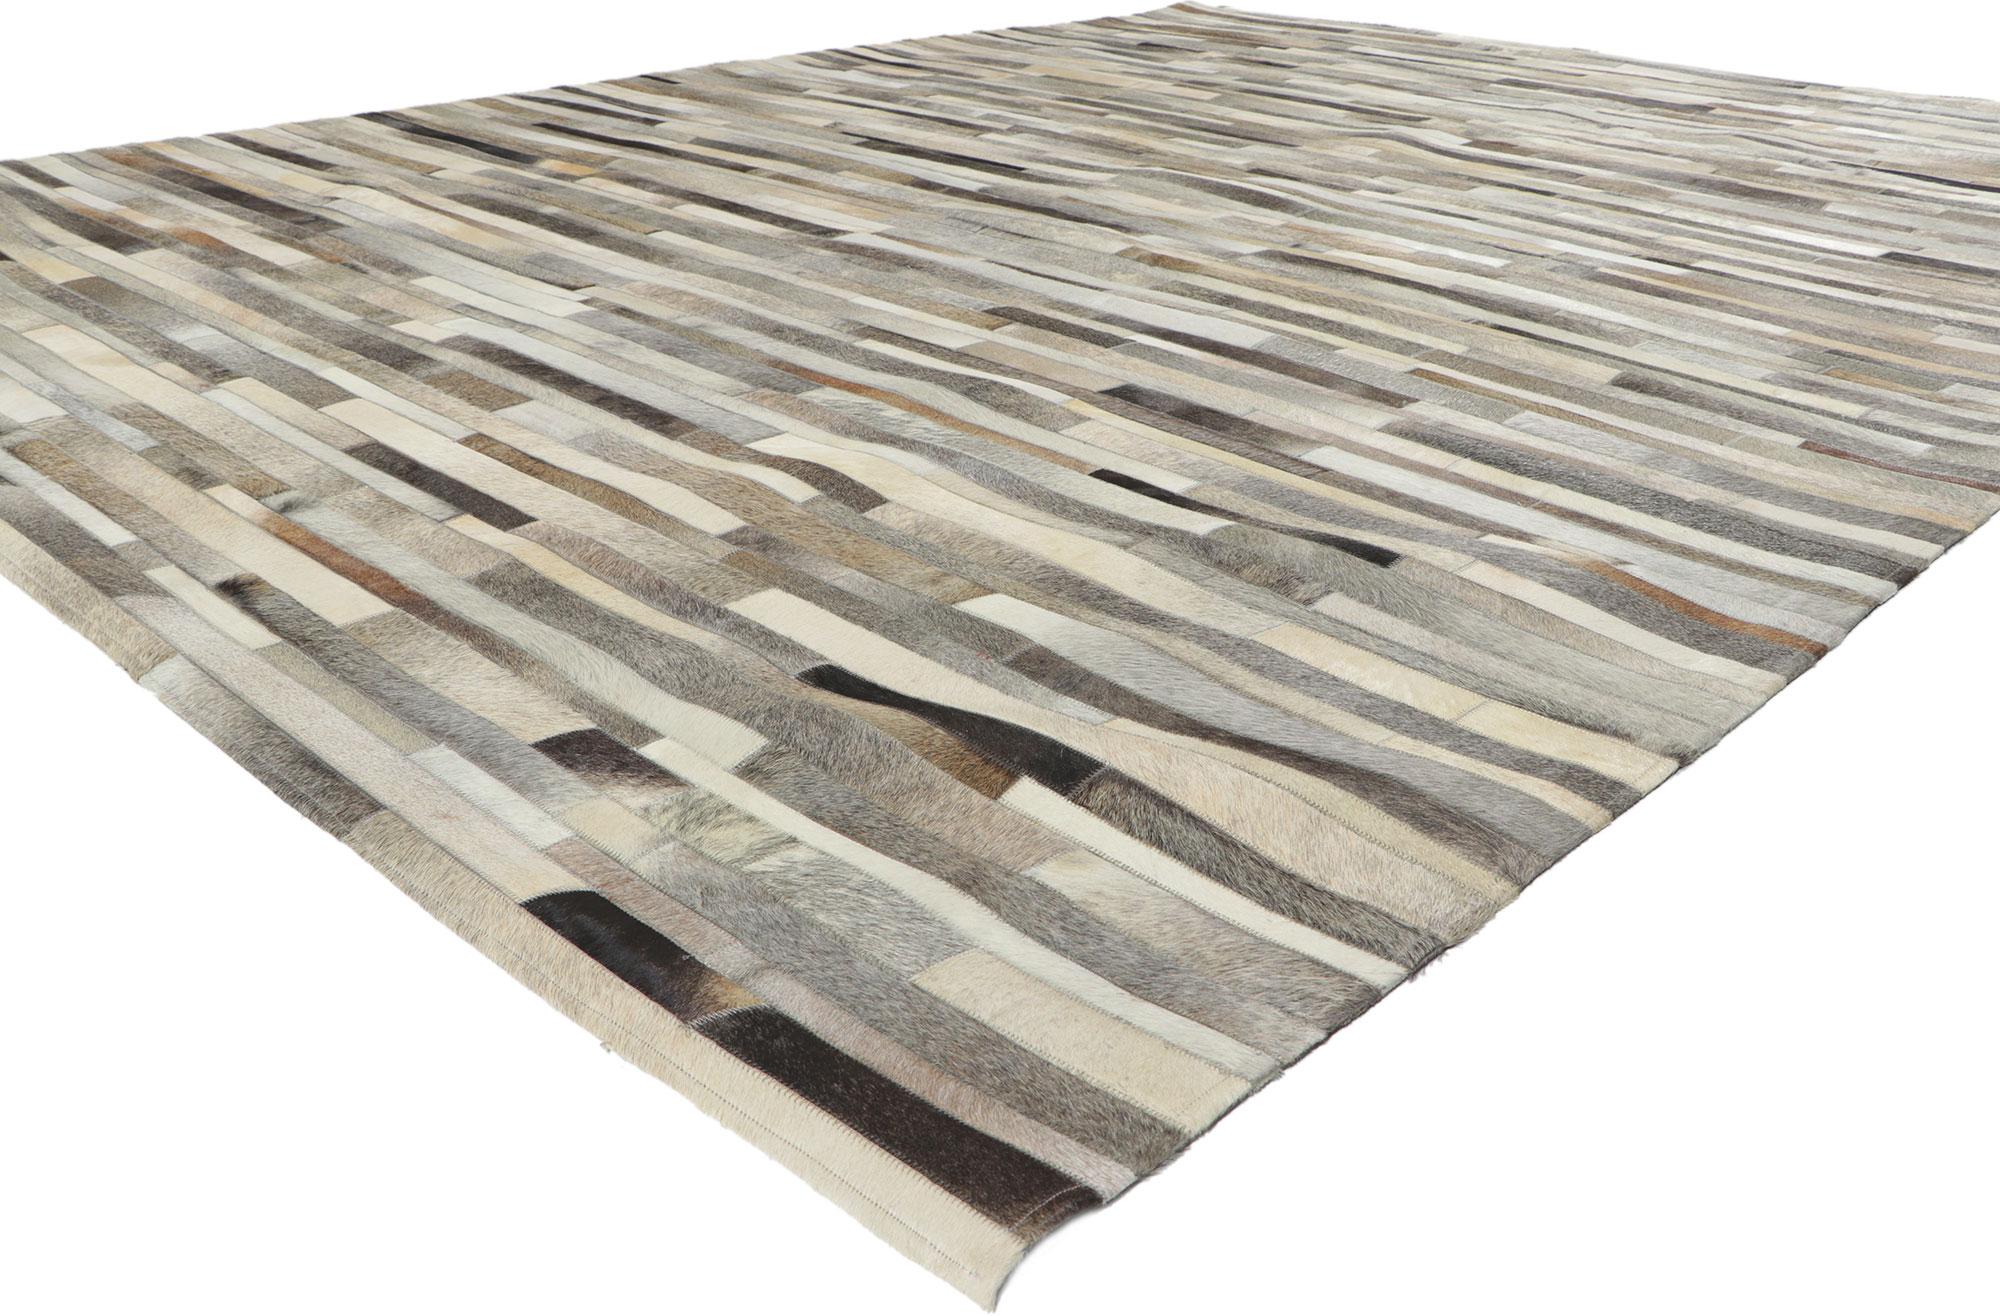 30915 New Contemporary Patchwork Cowhide Rug with Modern Style 09'01 x 12'00. Call the wild indoors and bring a sense of adventure home with this handcrafted cowhide rug. Showcasing a modern design, incredible detail and texture, this leather